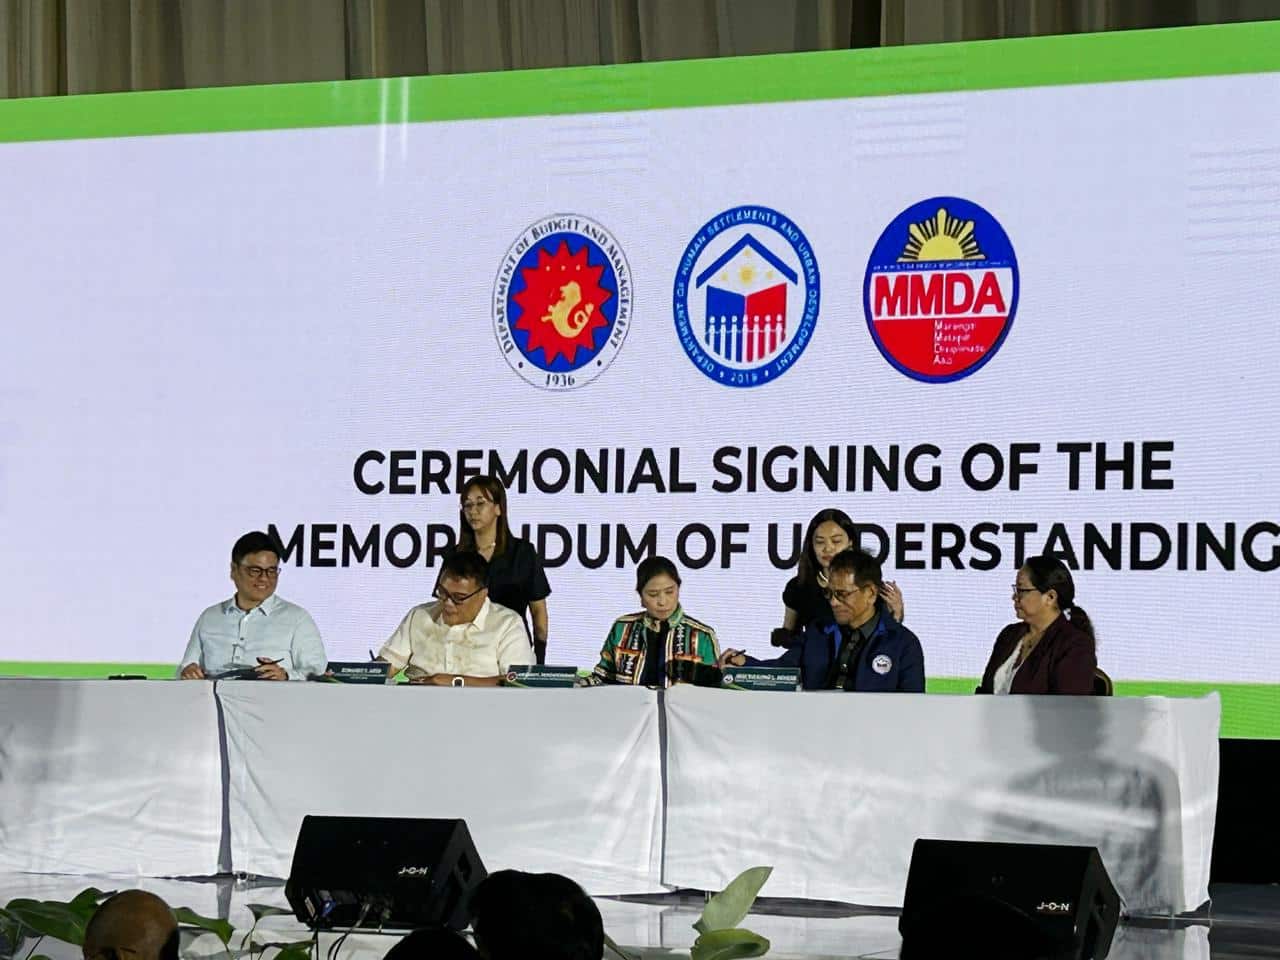 The Local Government Support Fund (LGSF) - Green Green Green Program was launched on Thursday by the Department of Budget and Management (DBM) and the Metro Manila Development Authority (MMDA).